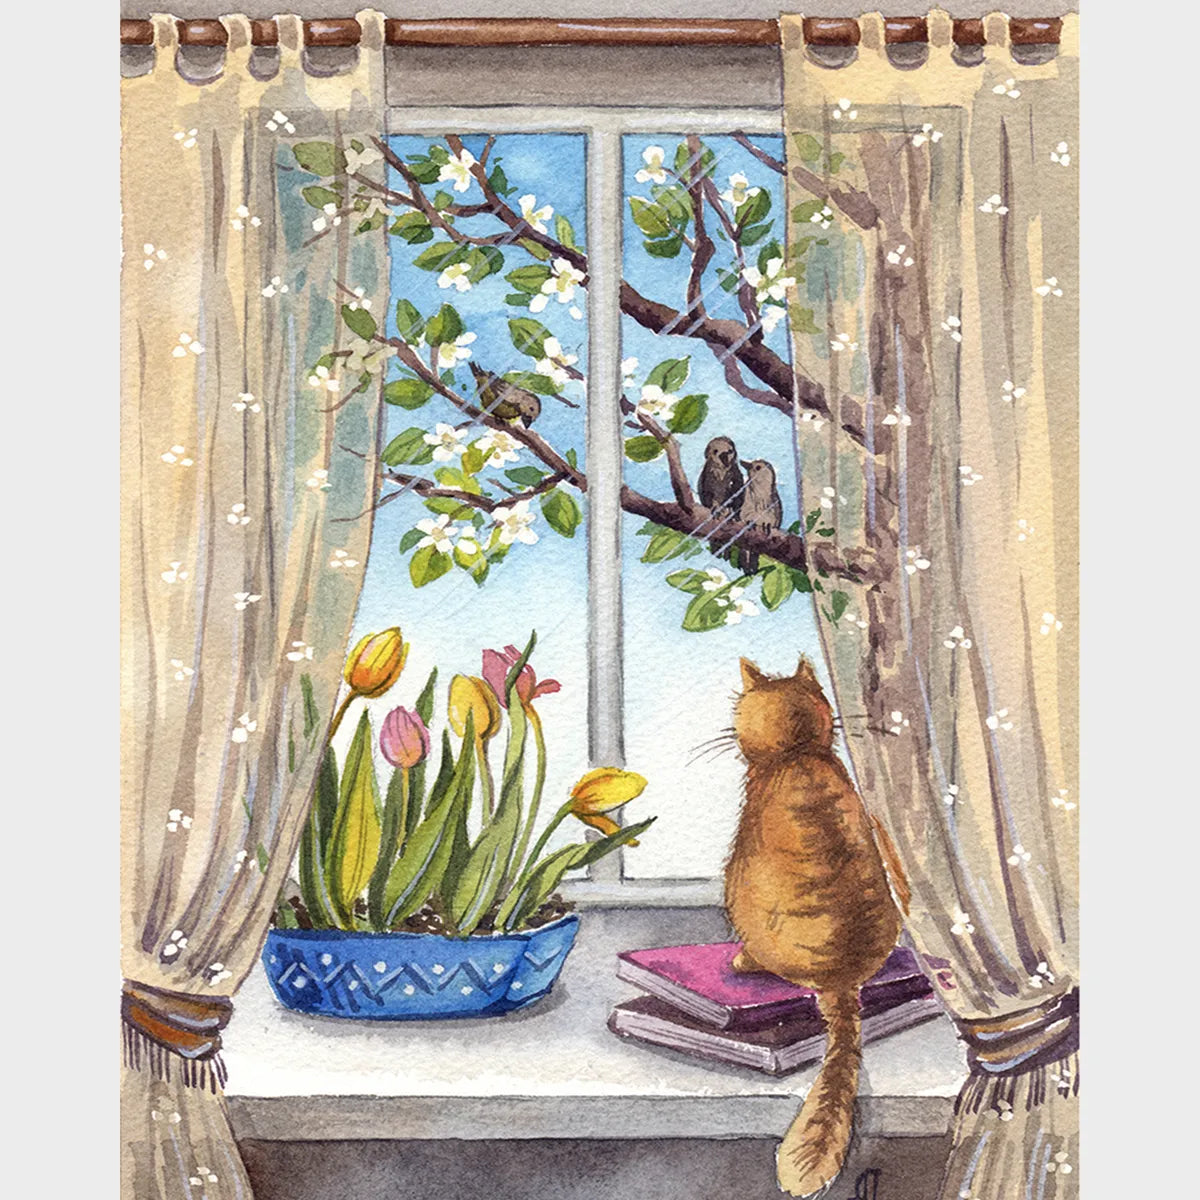 A Peaceful Morning - Diamond Painting Kit-This stunning diamond painting kit, showcasing an adorable cat peering from an enchanting window amidst beautiful blossoms, is guaranteed to brighten your day!-Canvas by Numbers